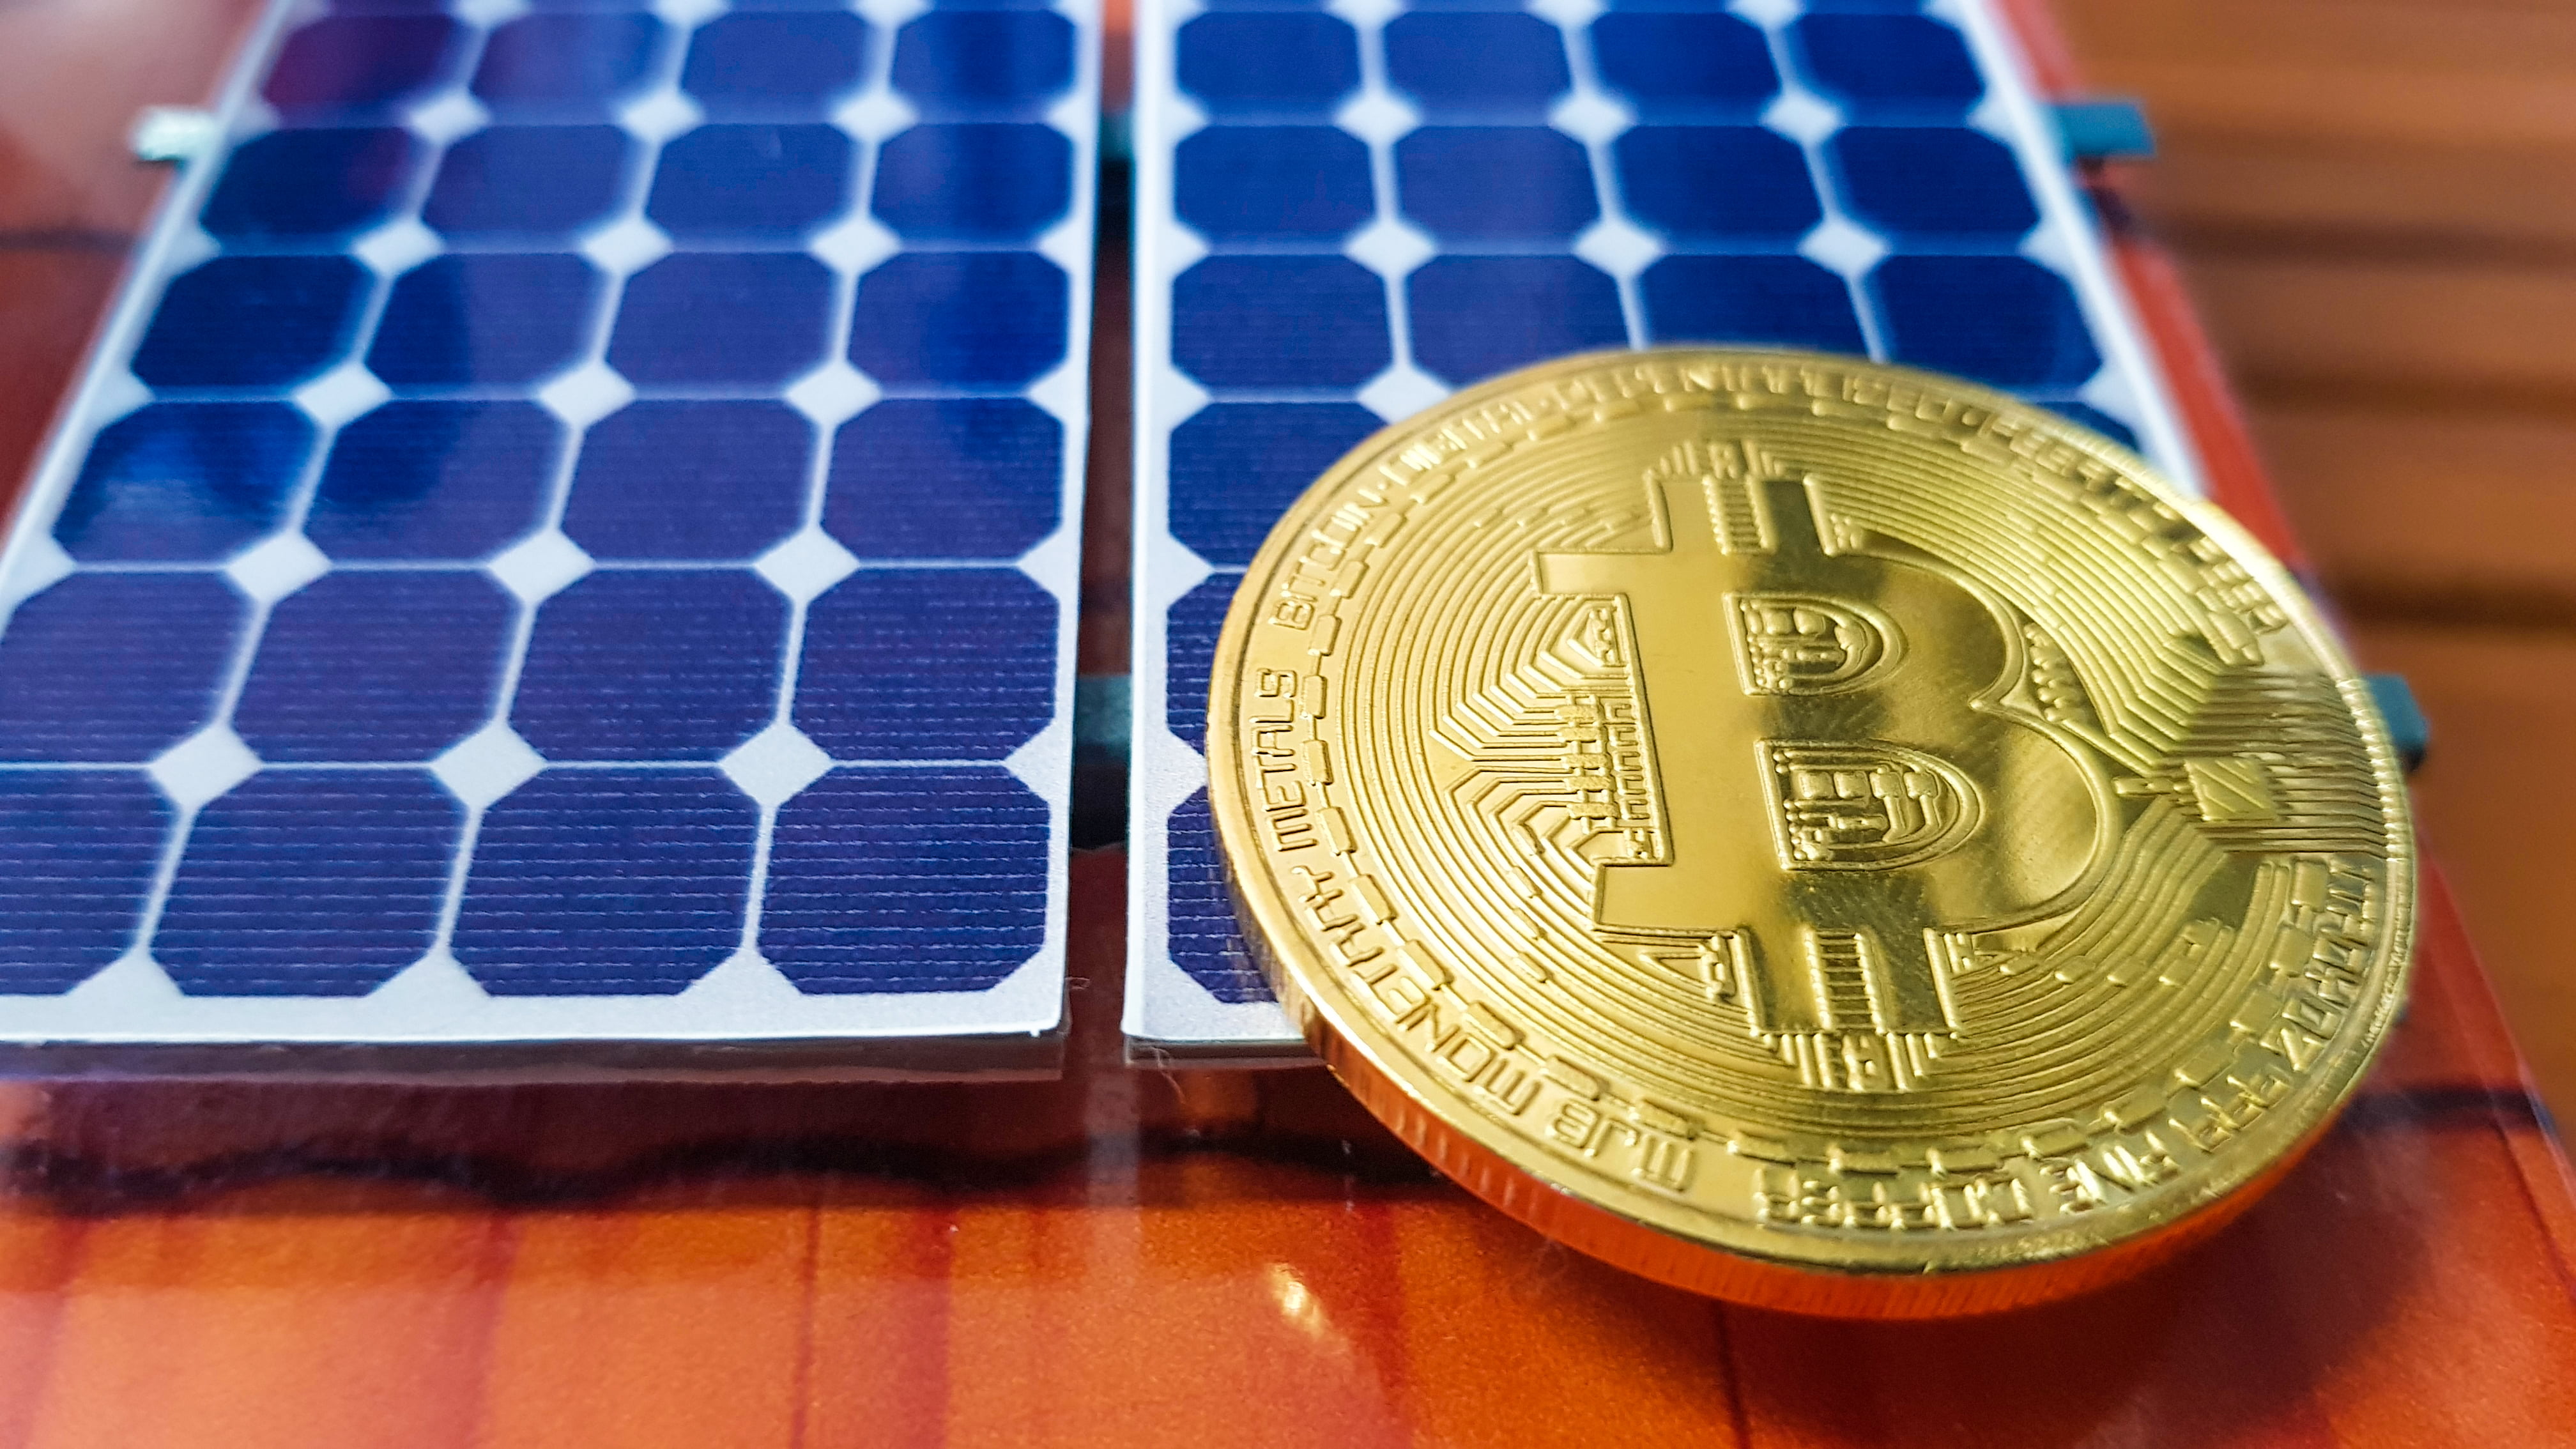 bitcoin energy consumtion a non-issue thanks to free solar energy